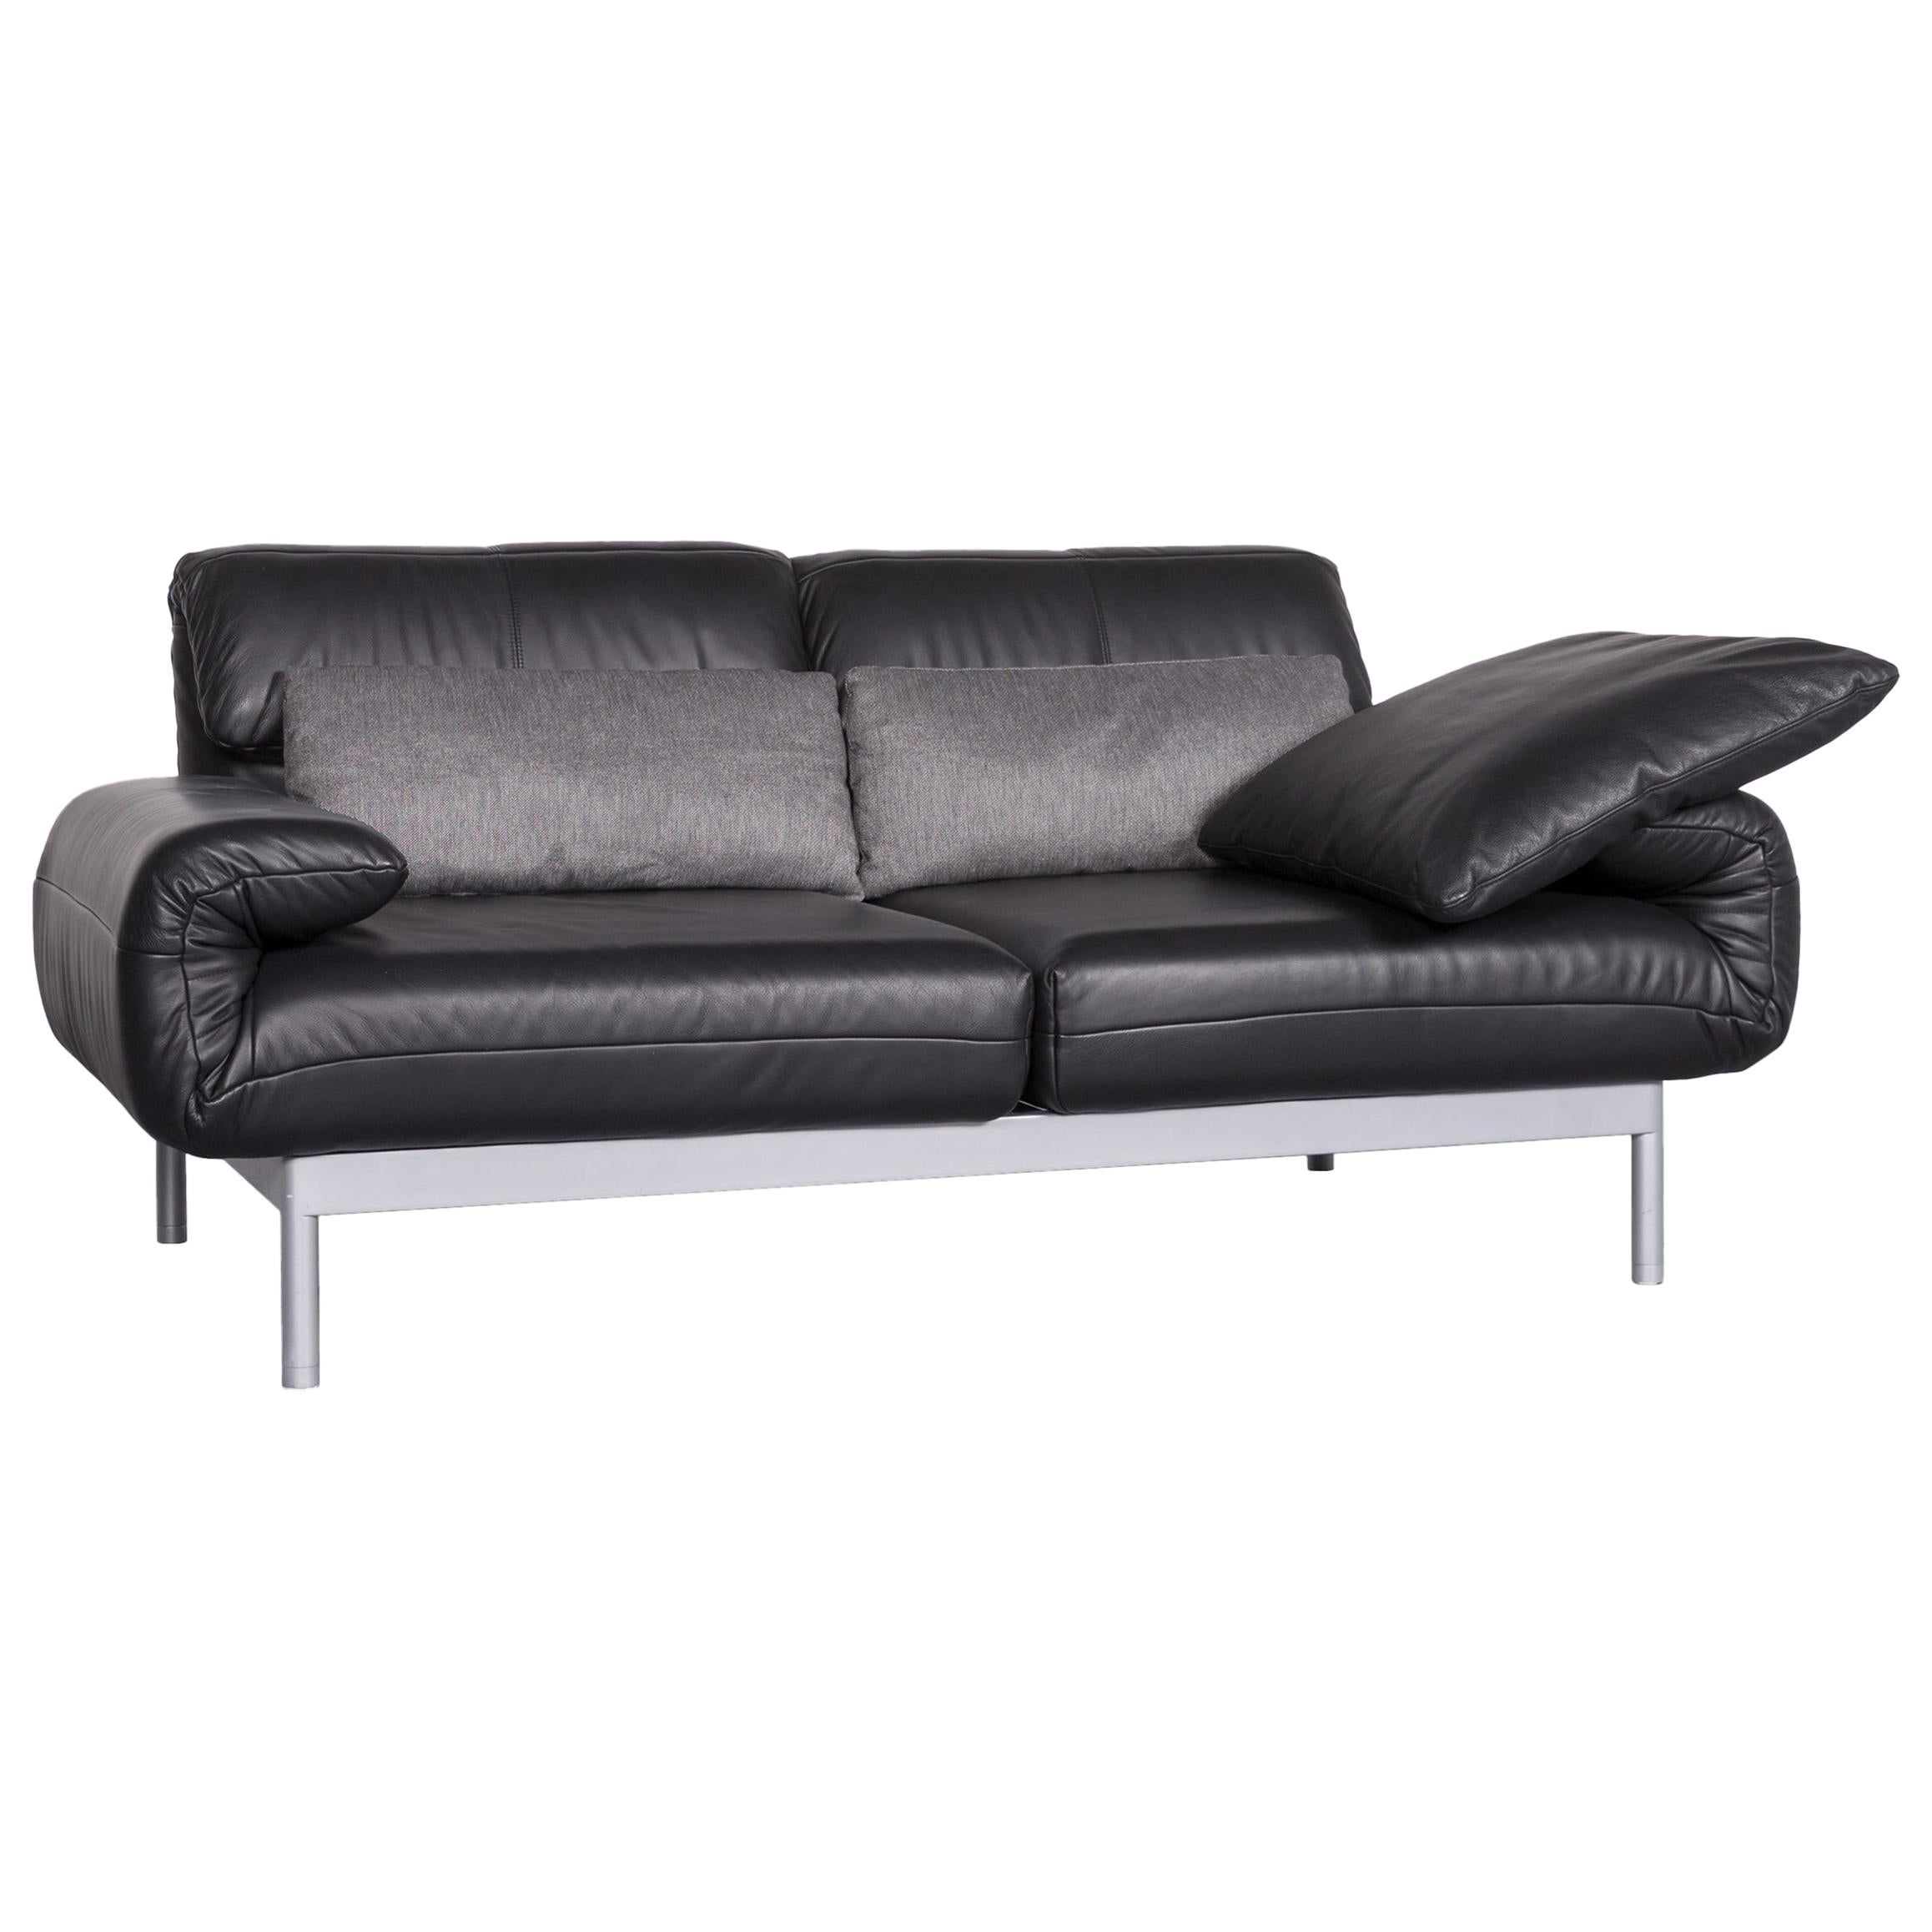 Rolf Benz Plura Designer Sofa Leather black Relax Function Couch Modern For Sale